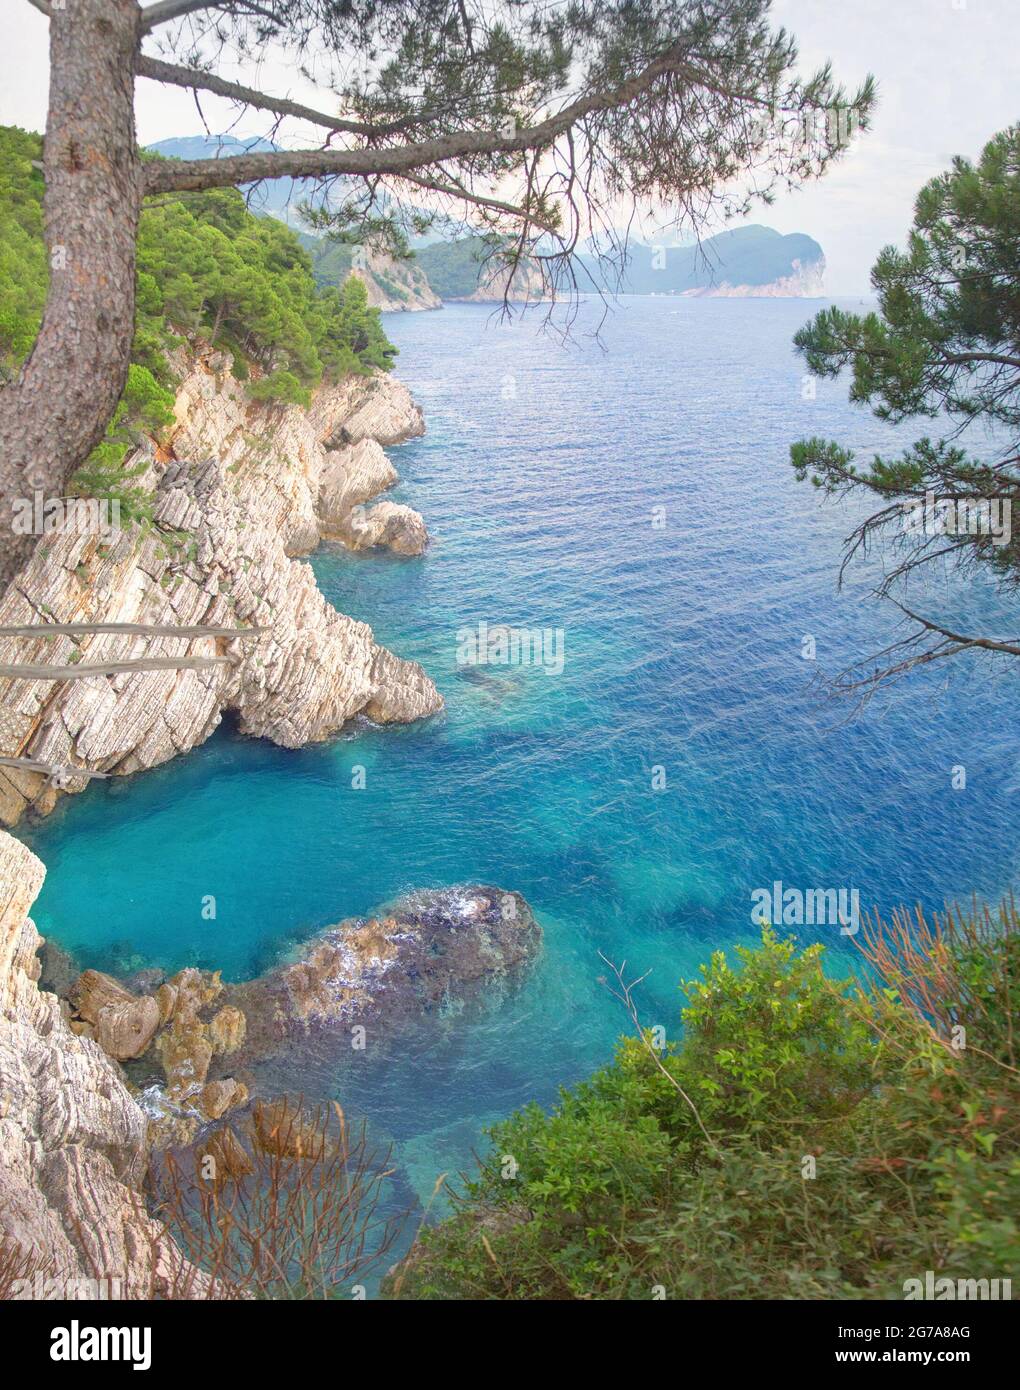 The layered rocks and turquoise sea. Petrovac, Montenegro Stock Photo